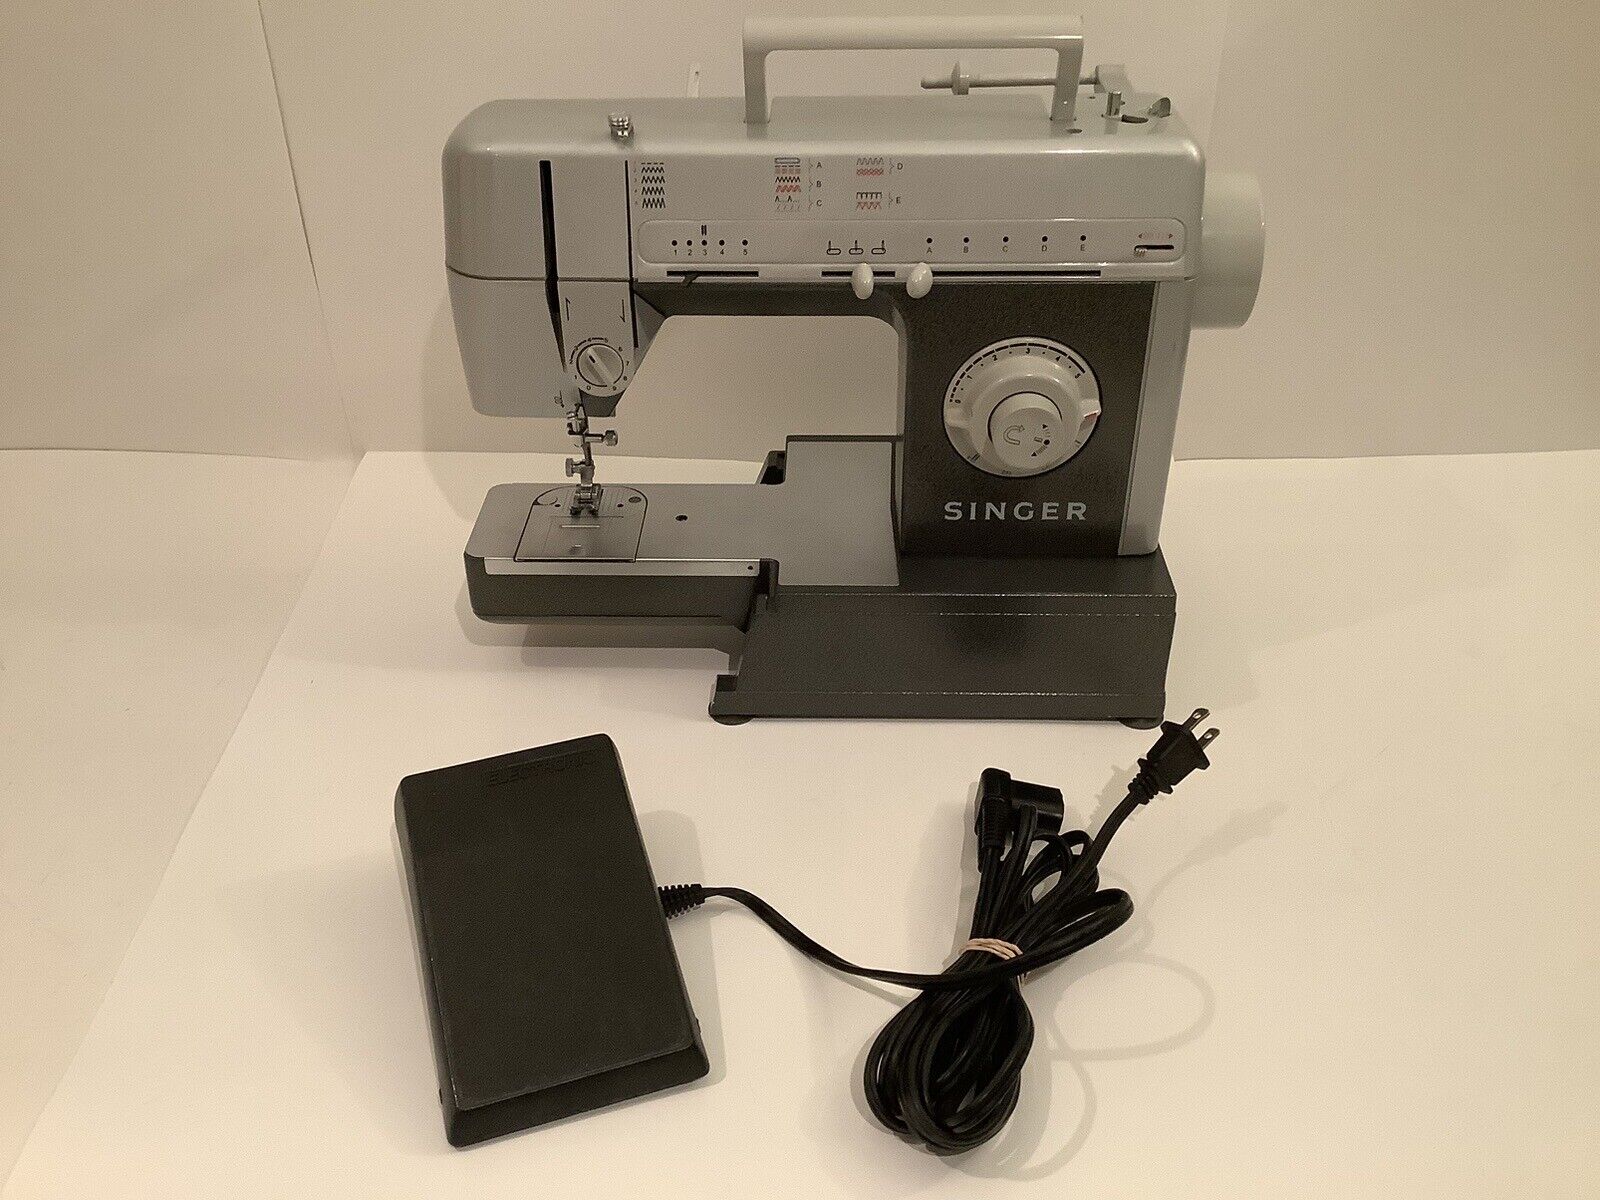 SINGER PROFESSIONAL SEWING MACHINE CG-550C - WORKS WITH ISSUE - PARTS OR REPAIR